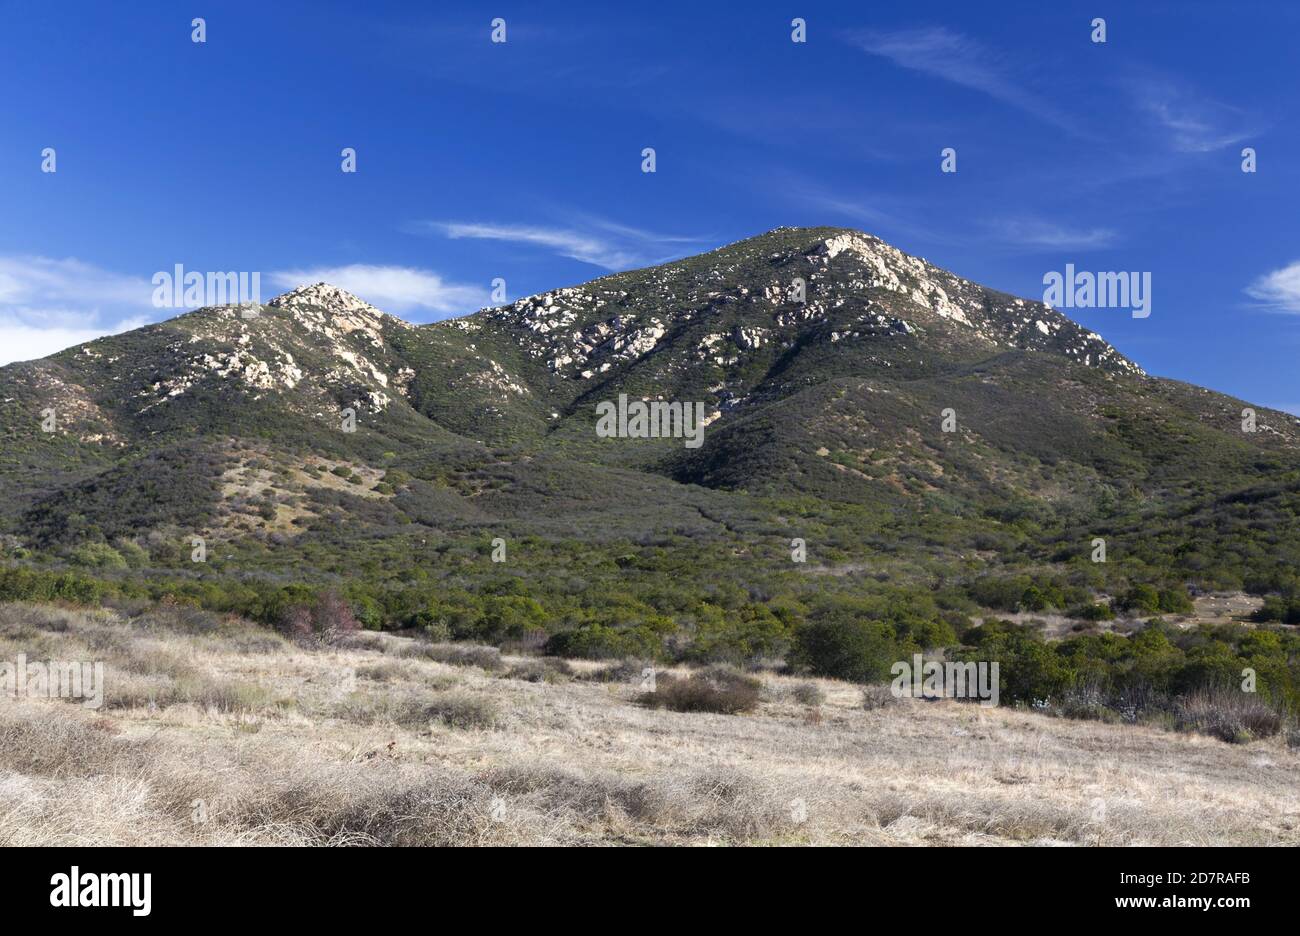 Iron Mountain Scenic Landscape and Clear Blue Sky in Poway, San Diego County North Inland, Südkalifornien Stockfoto